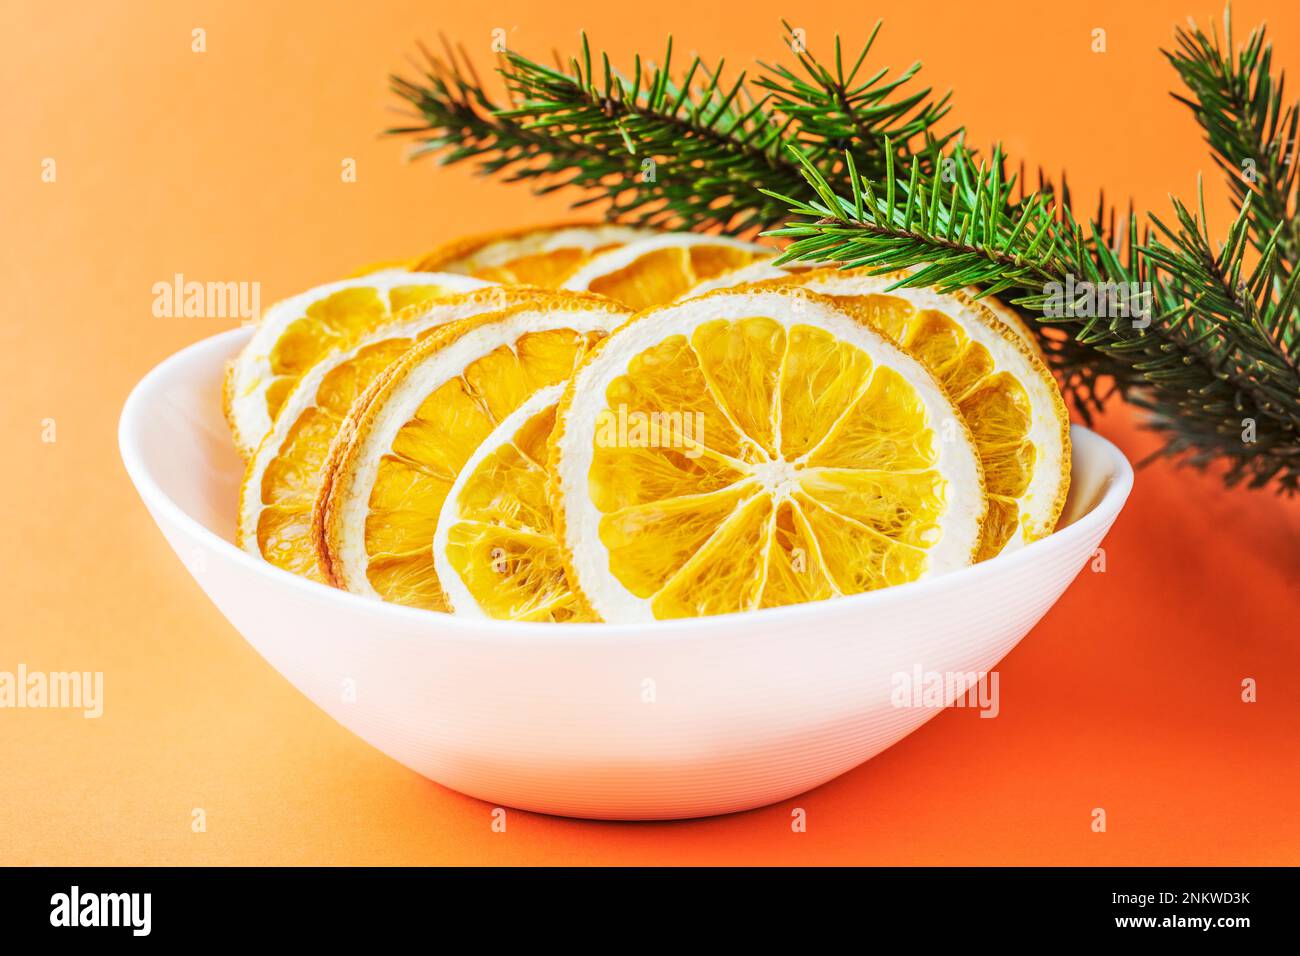 Orange chips in a white plate, near the spruce branch, on an orange red background. Eco organic homemade dried orange slices, chips. Healthy snack. Cl Stock Photo